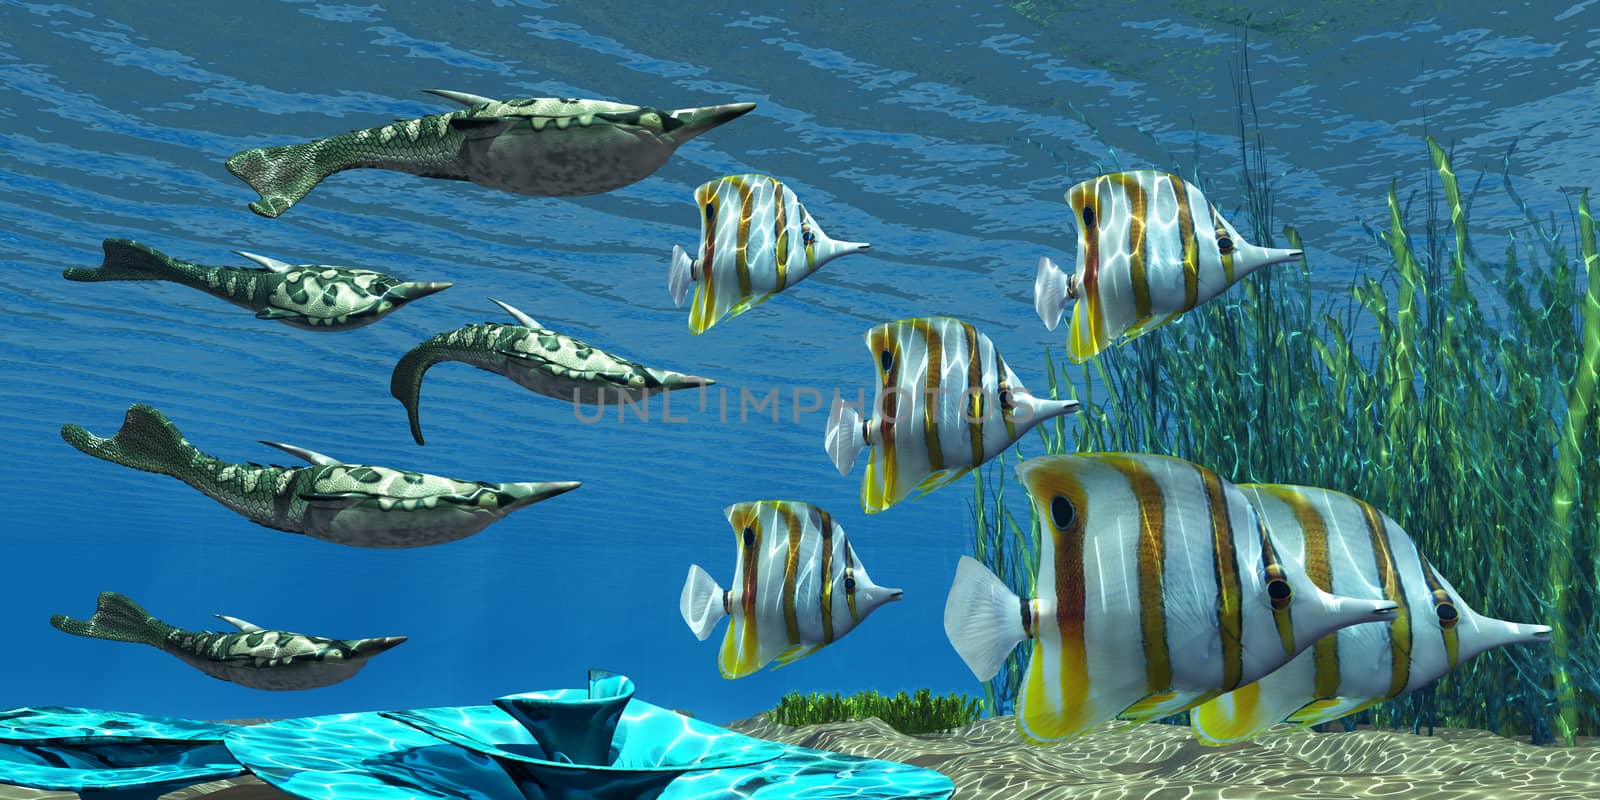 Pteraspis is an extinct genus of jawless ocean fish that lived in the Devonian period.